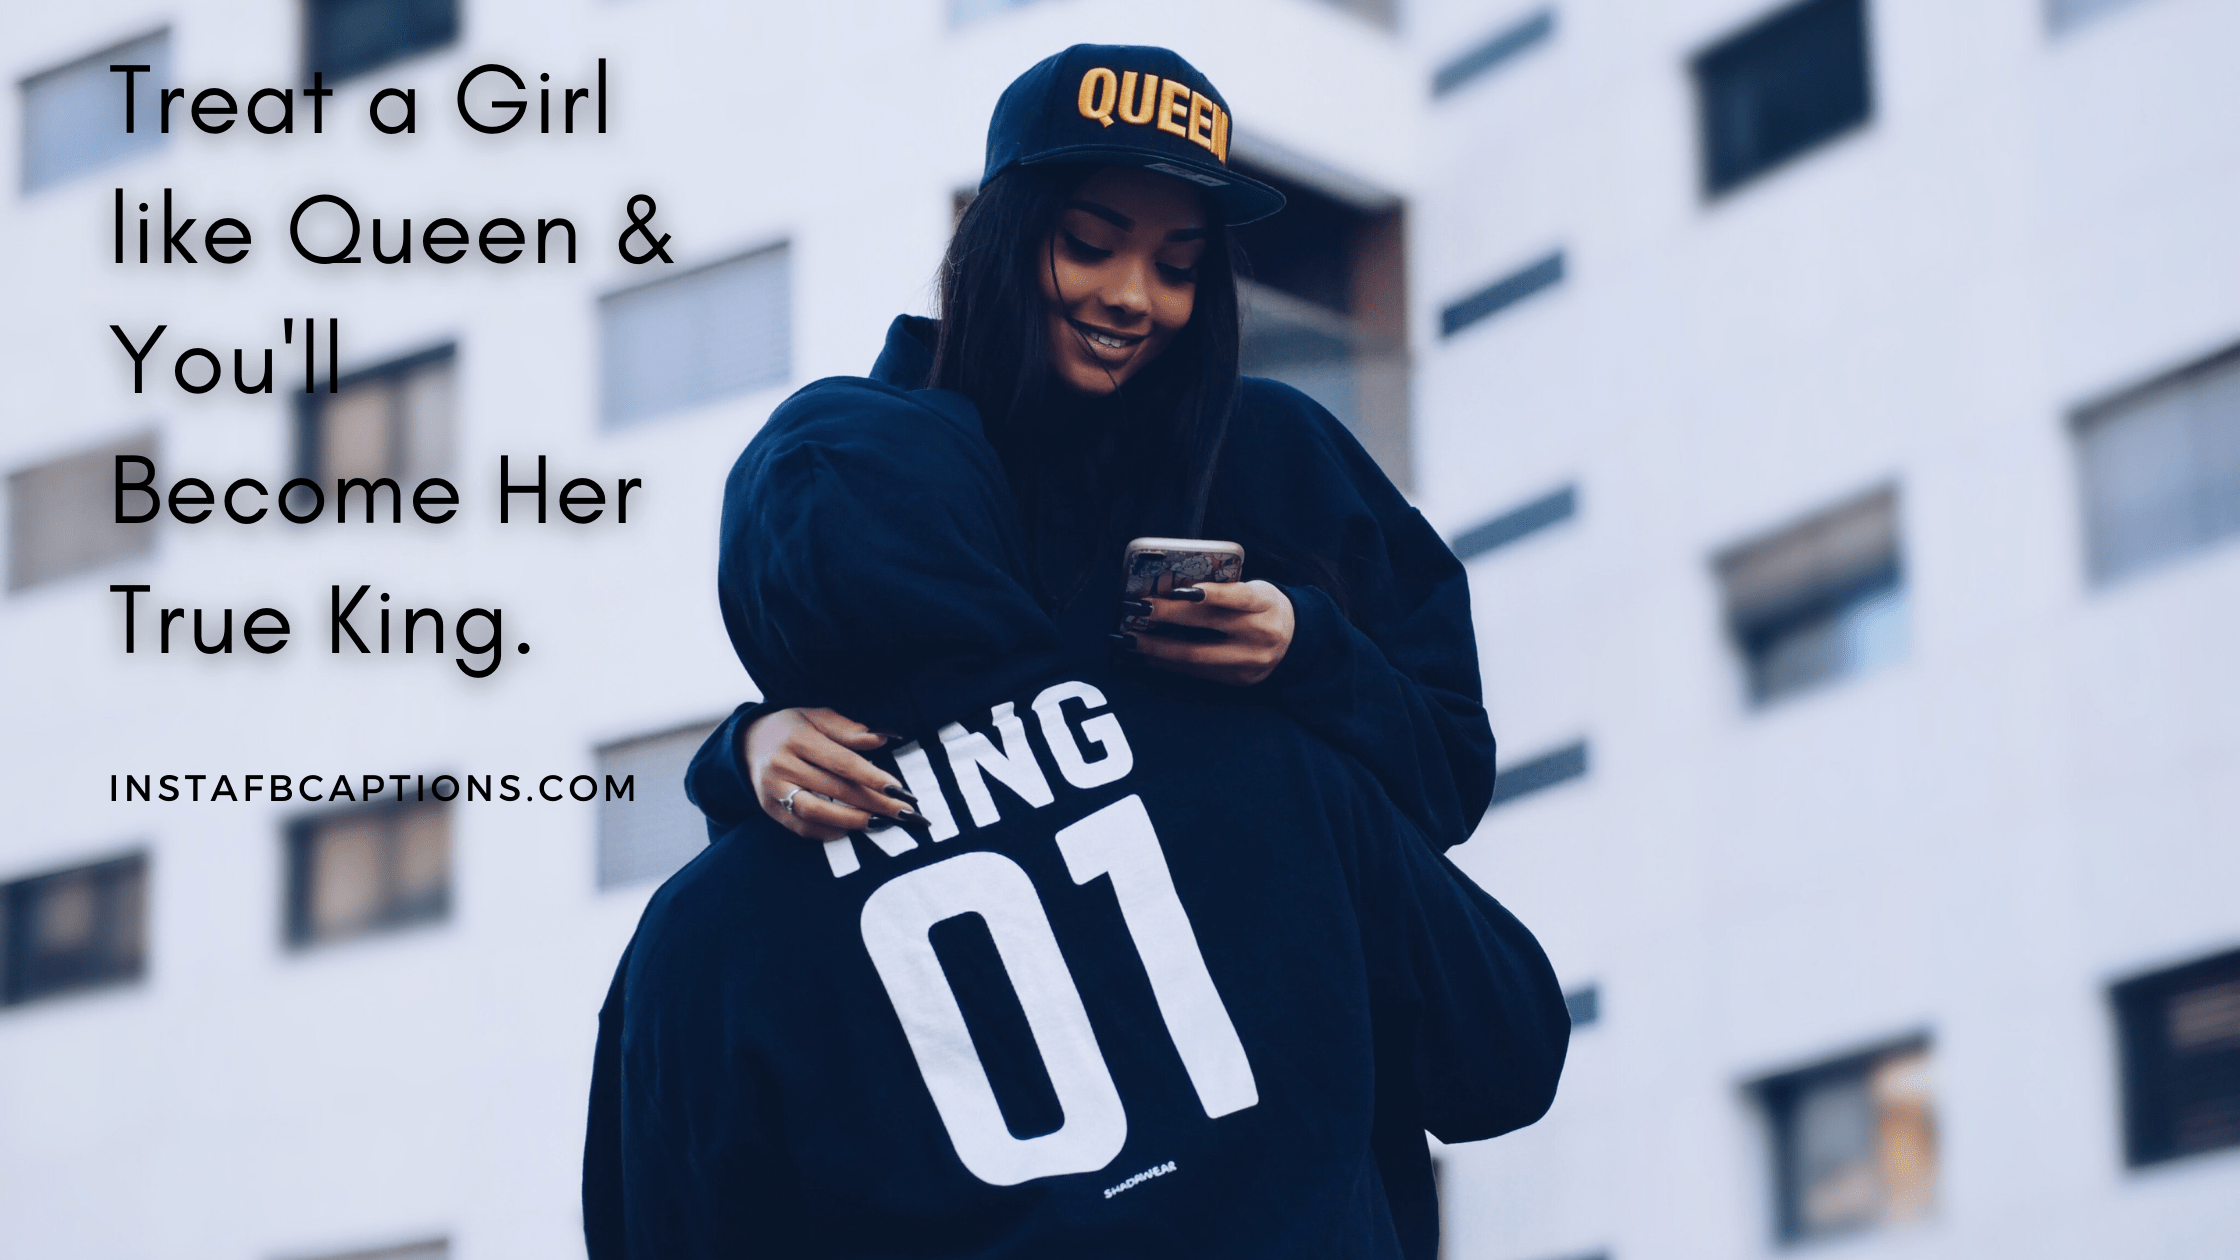 Treat a Girl like Queen & You'll Become Her True King  - Best King And Queen Couple Captions - [New Captions] King Captions For Boys Instagram Post in 2023